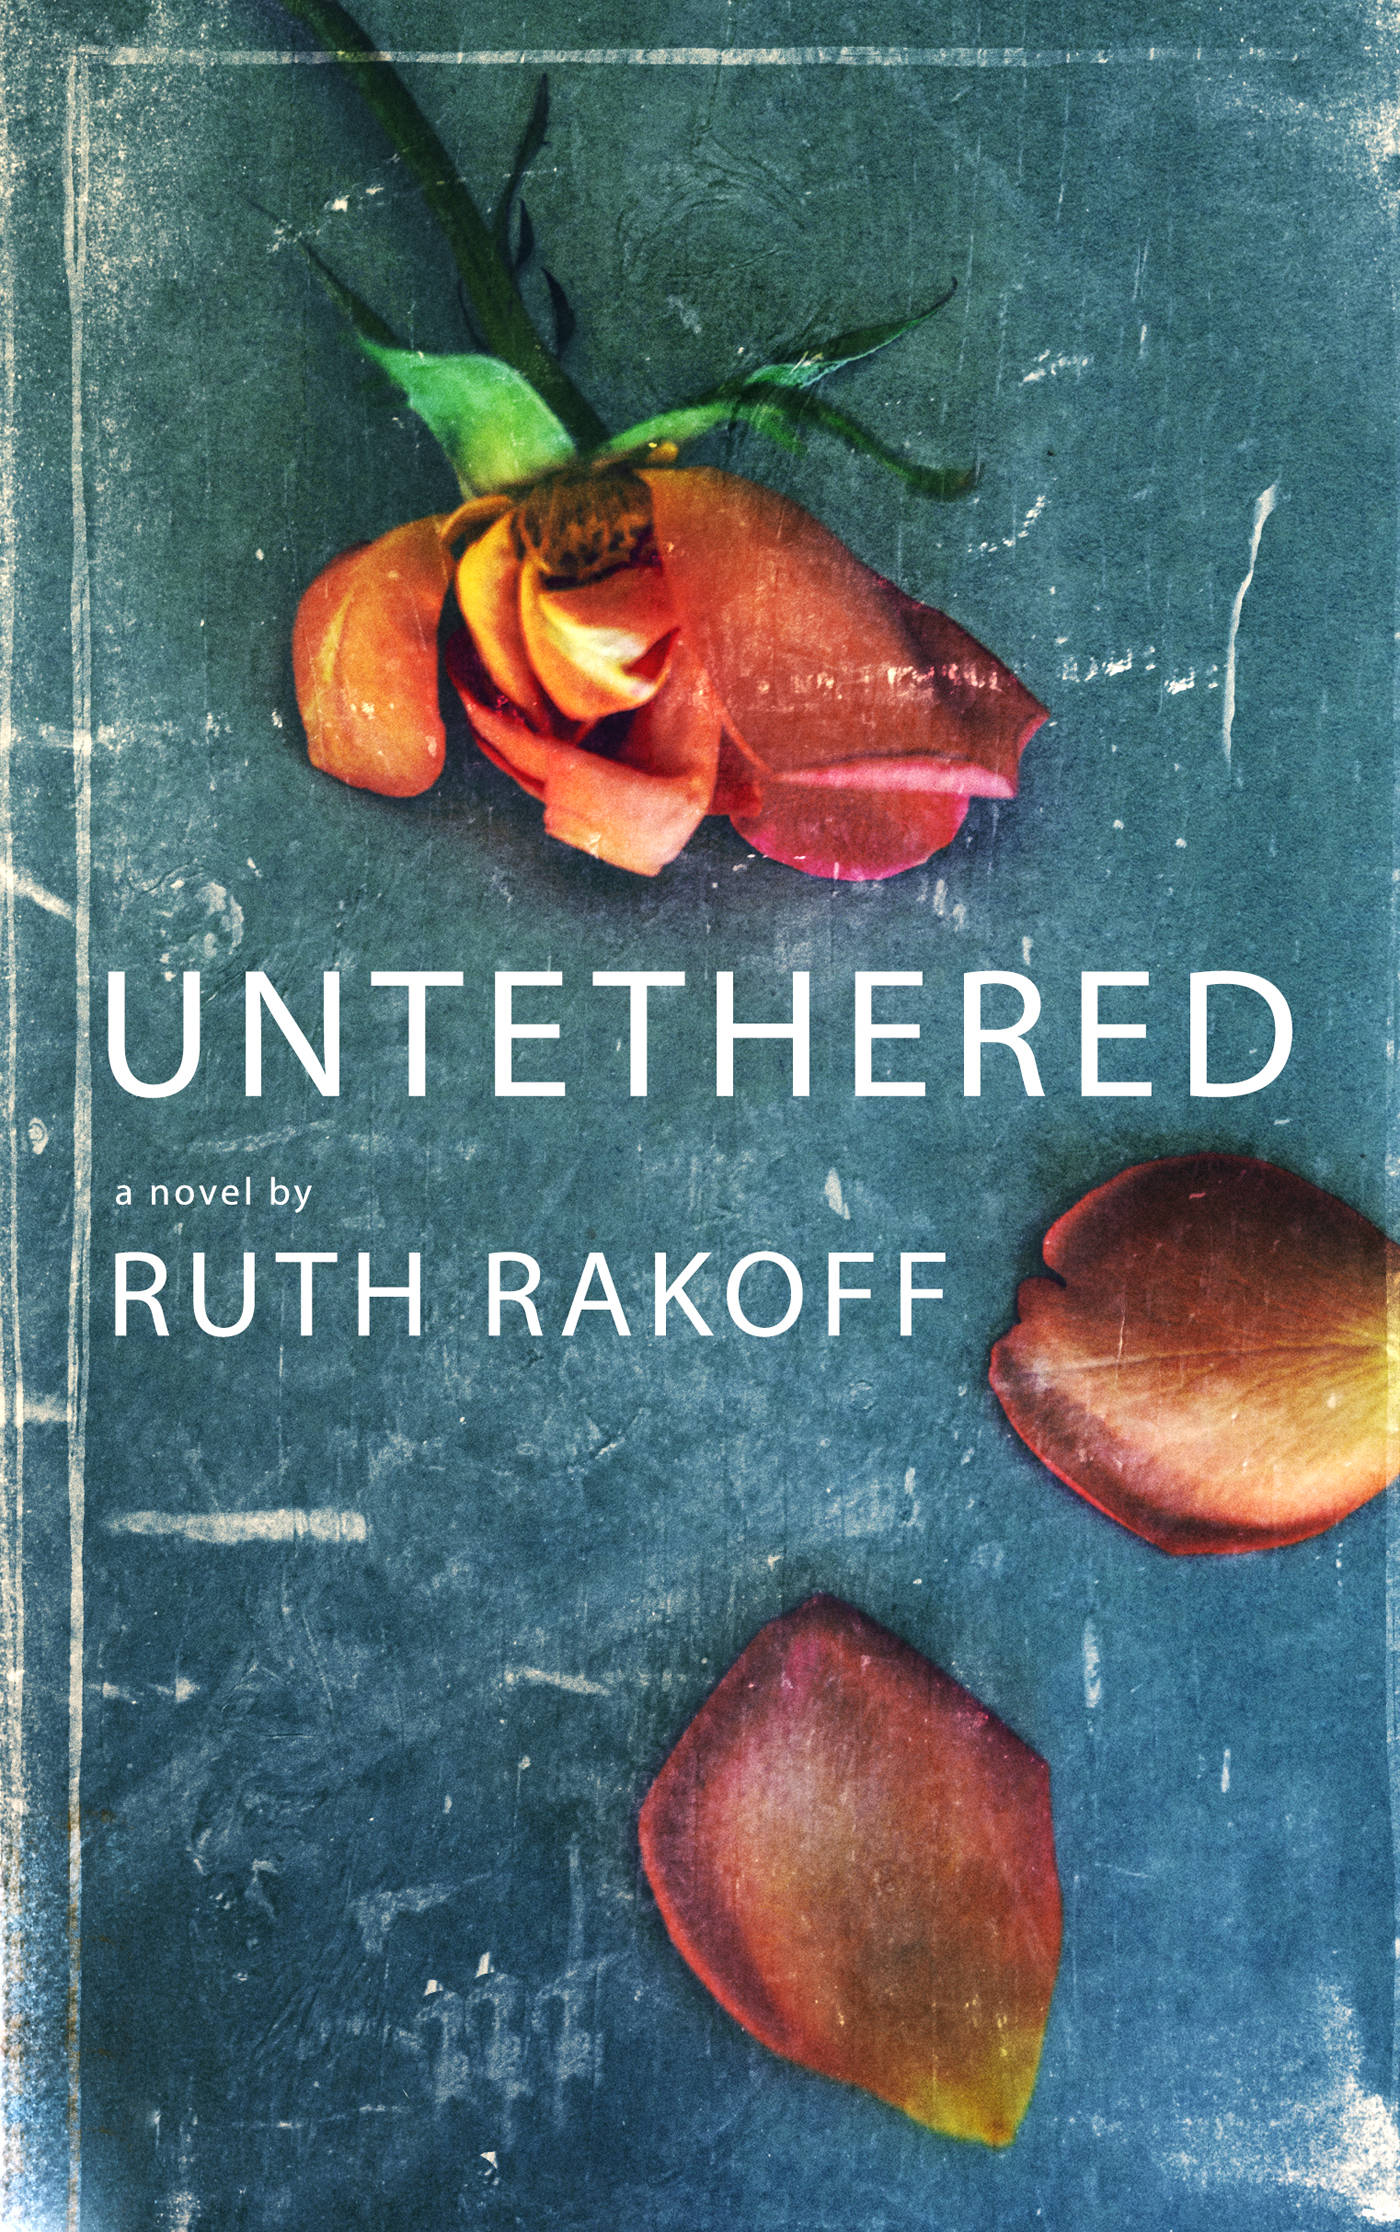 The cover of Untethered by Ruth Rakoff, showing an orange-yellow rose shedding its petals.